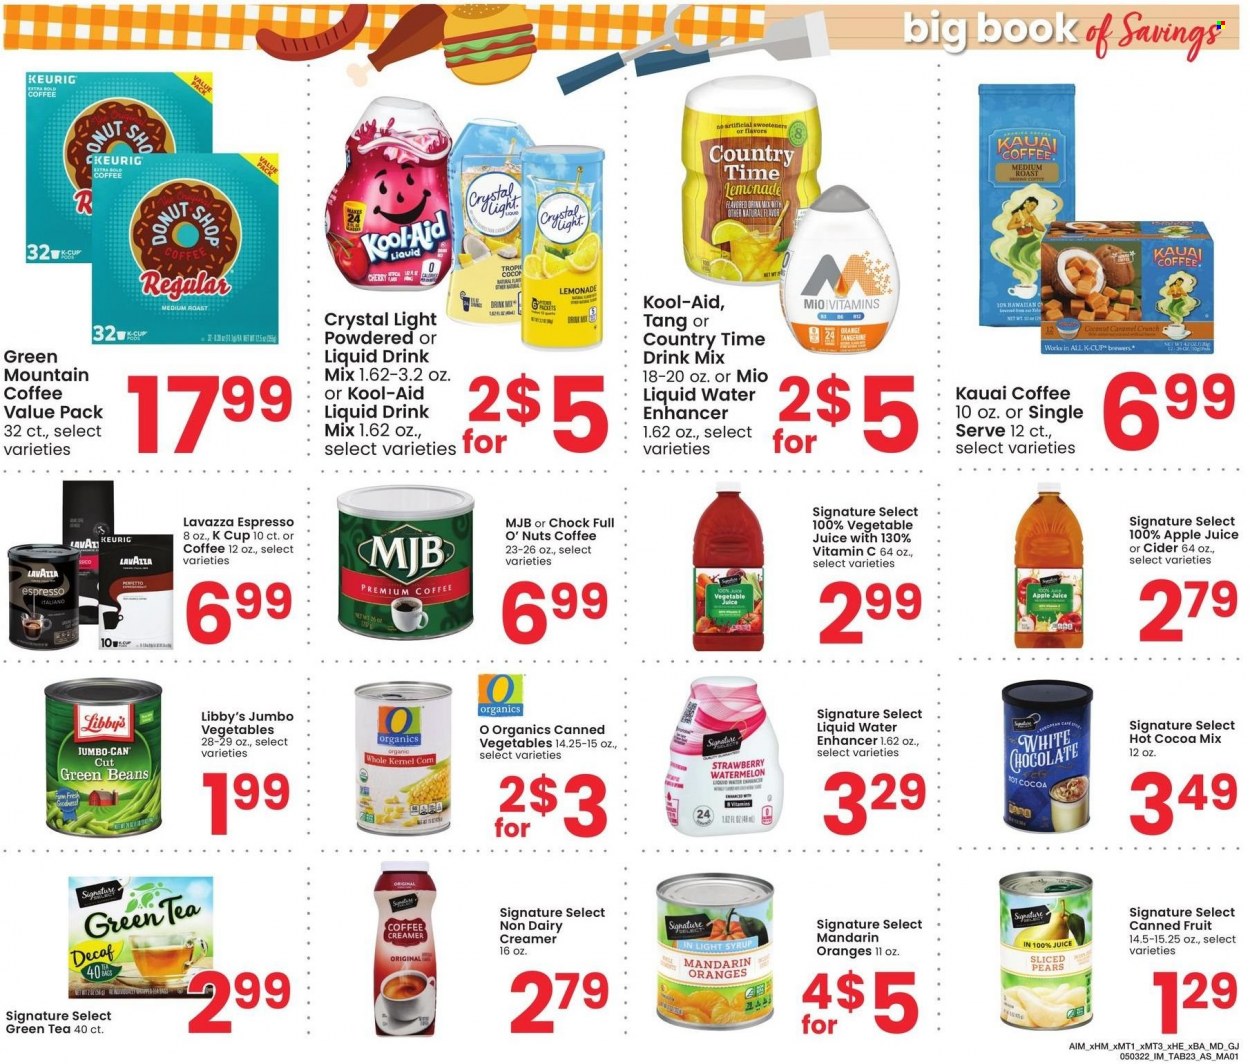 thumbnail - Albertsons Flyer - 05/03/2022 - 05/30/2022 - Sales products - green beans, mandarines, watermelon, pears, oranges, coconut, creamer, white chocolate, chocolate, brewer, canned vegetables, canned fruit, caramel, syrup, apple juice, lemonade, juice, vegetable juice, Country Time, hot cocoa, green tea, tea, coffee capsules, K-Cups, Keurig, Lavazza, Green Mountain, cider, vitamin c. Page 23.